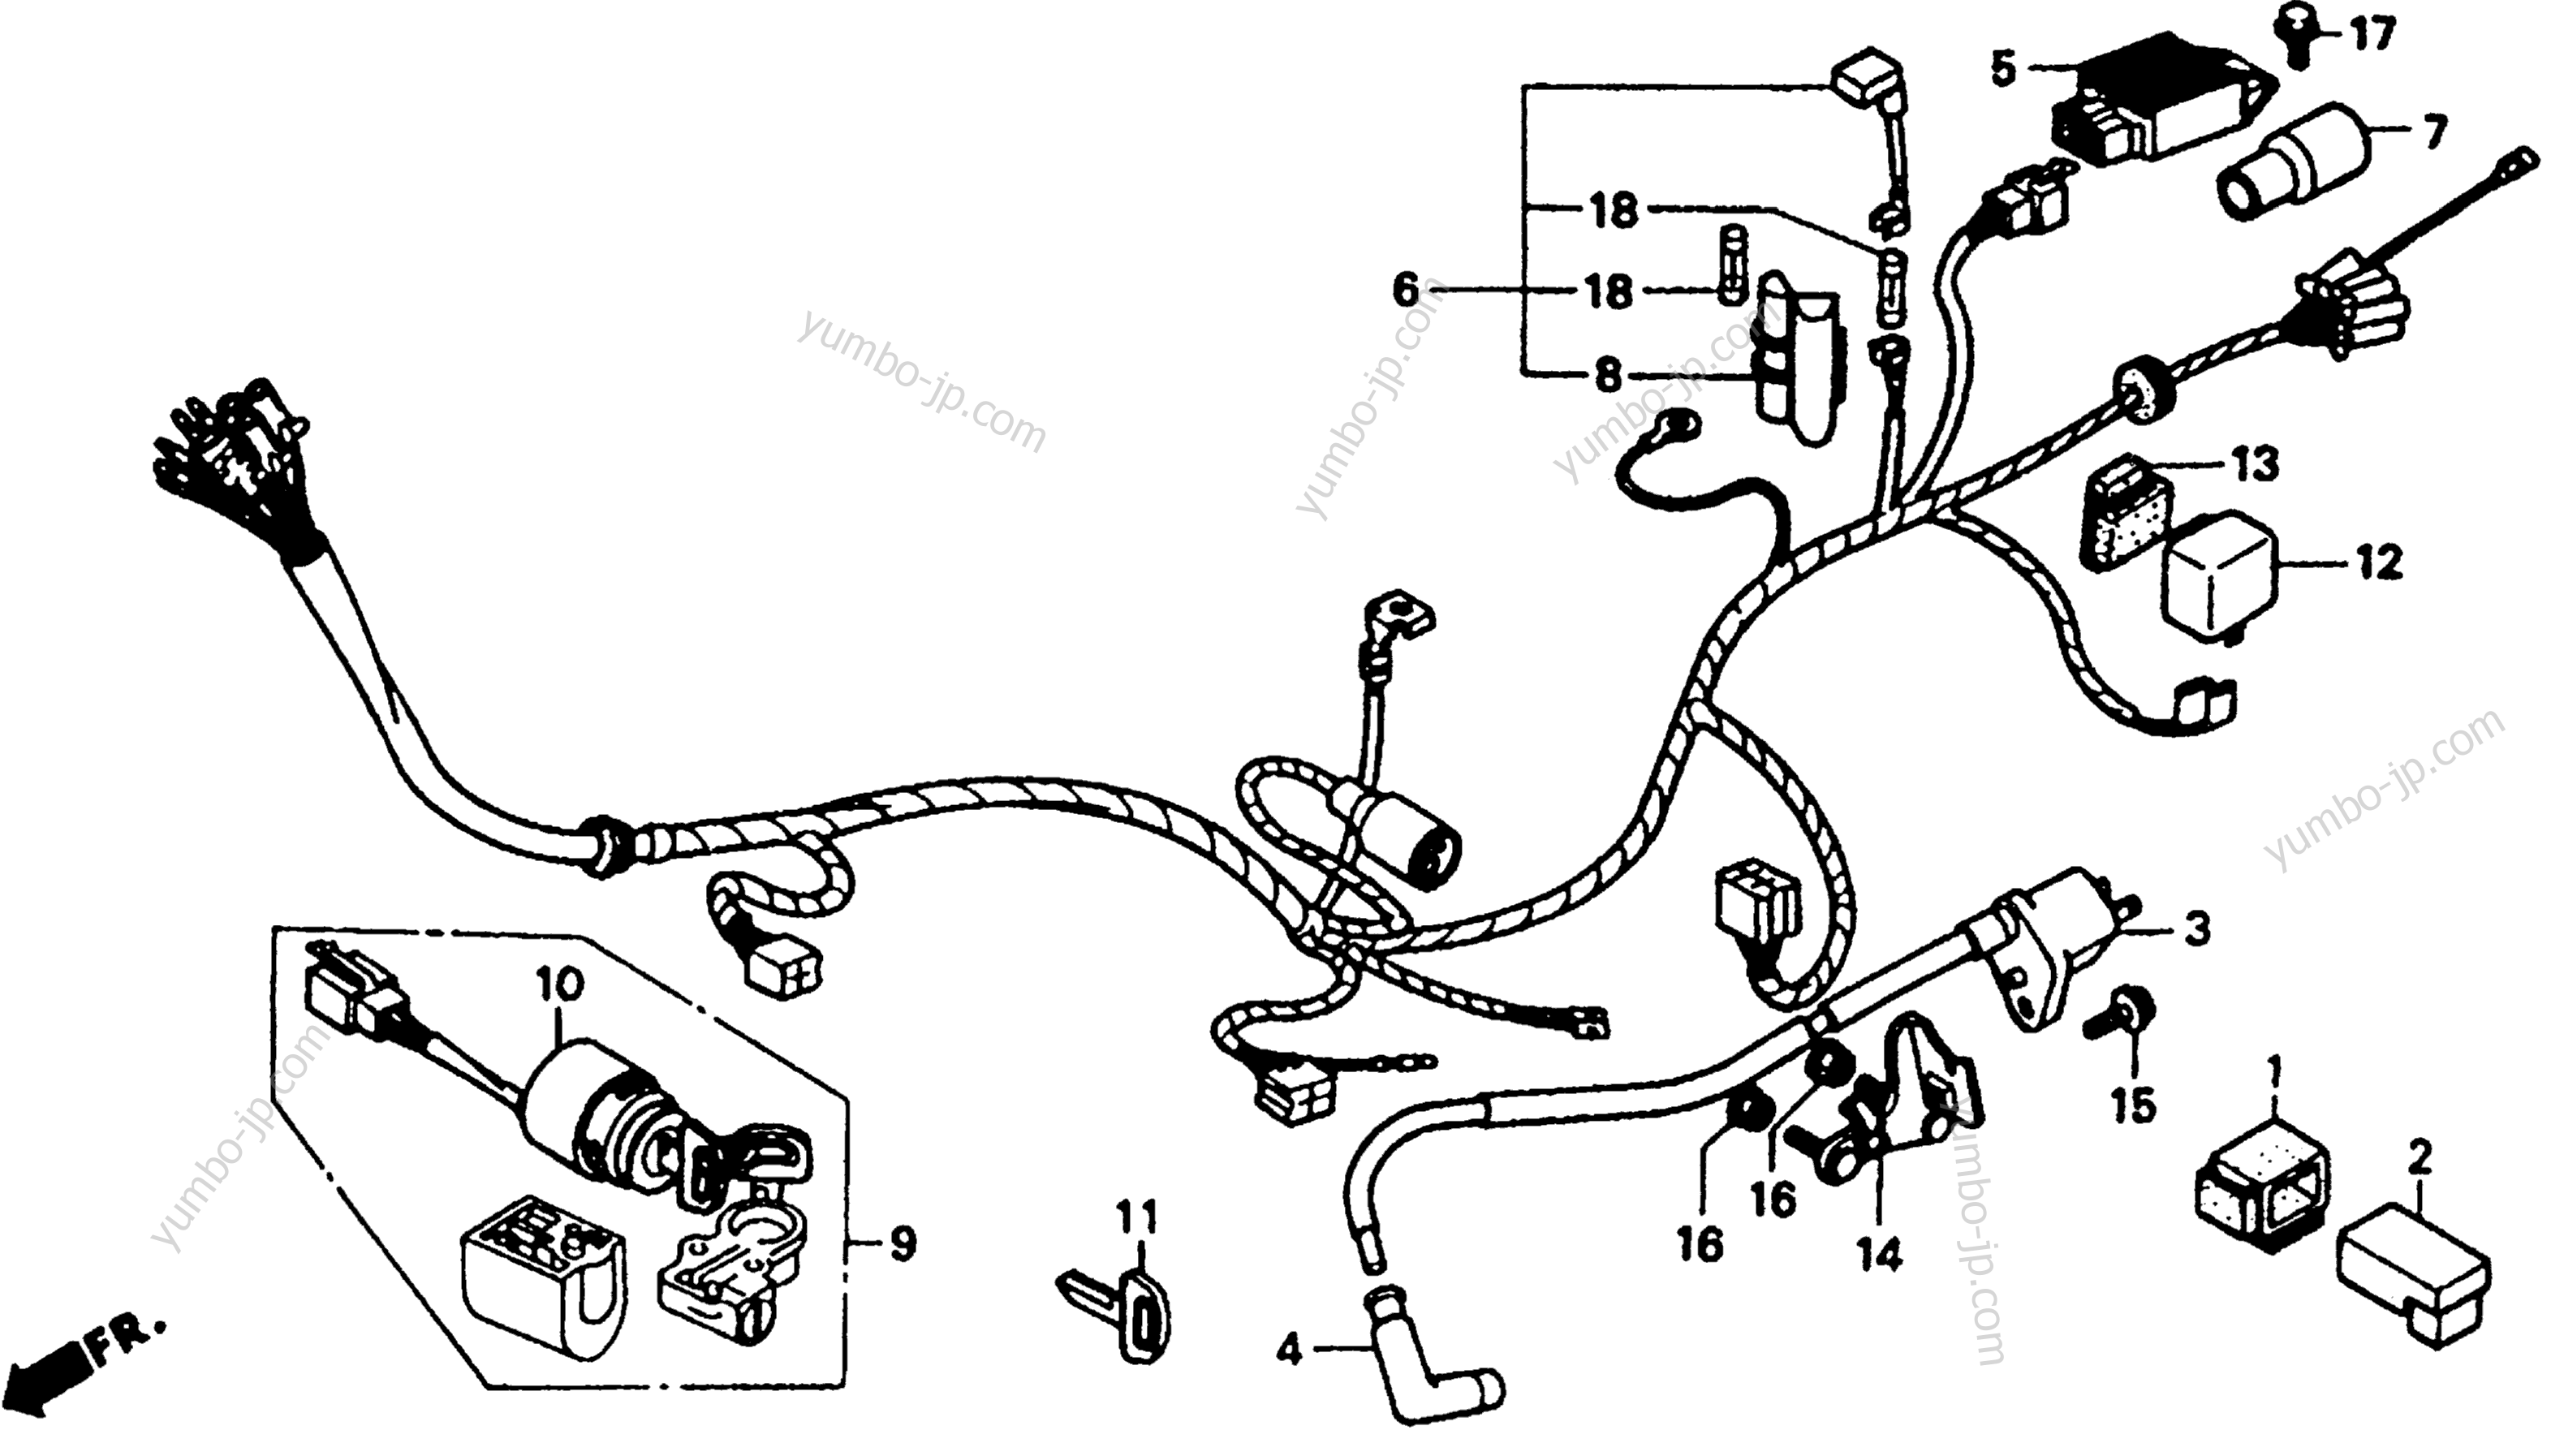 WIRE HARNESS for motorcycles HONDA CT70 AC 1992 year